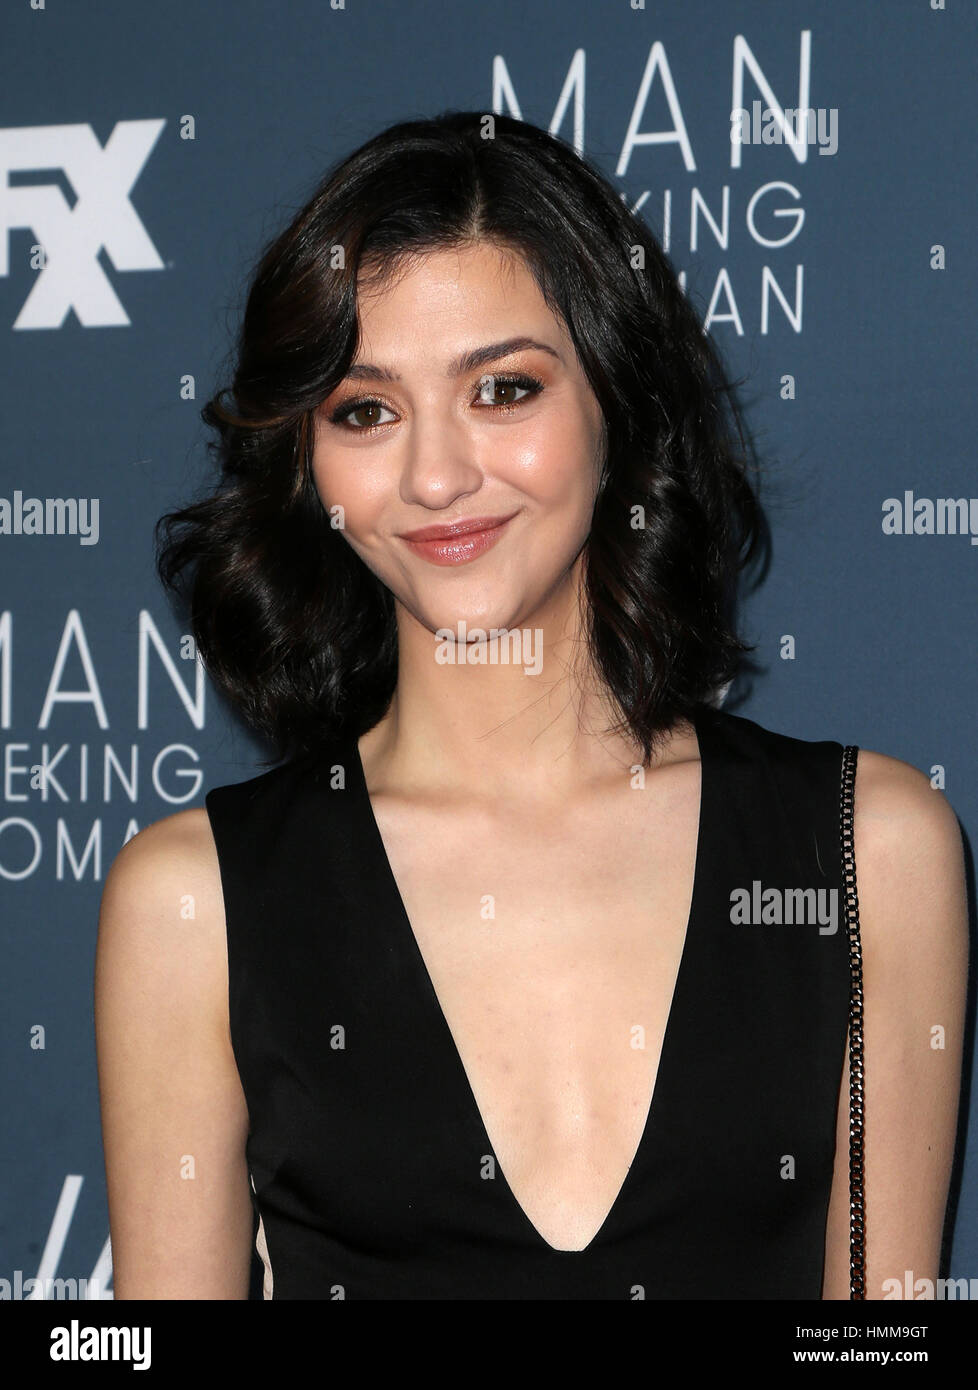 Premiere of FXX's 'It's Always Sunny In Philadelphia' season 12 and 'Man Seeking Woman' season 3 - Arrivals  Featuring: Katie Findlay Where: Los Angeles, California, United States When: 03 Jan 2017 Credit: FayesVision/WENN.com Stock Photo